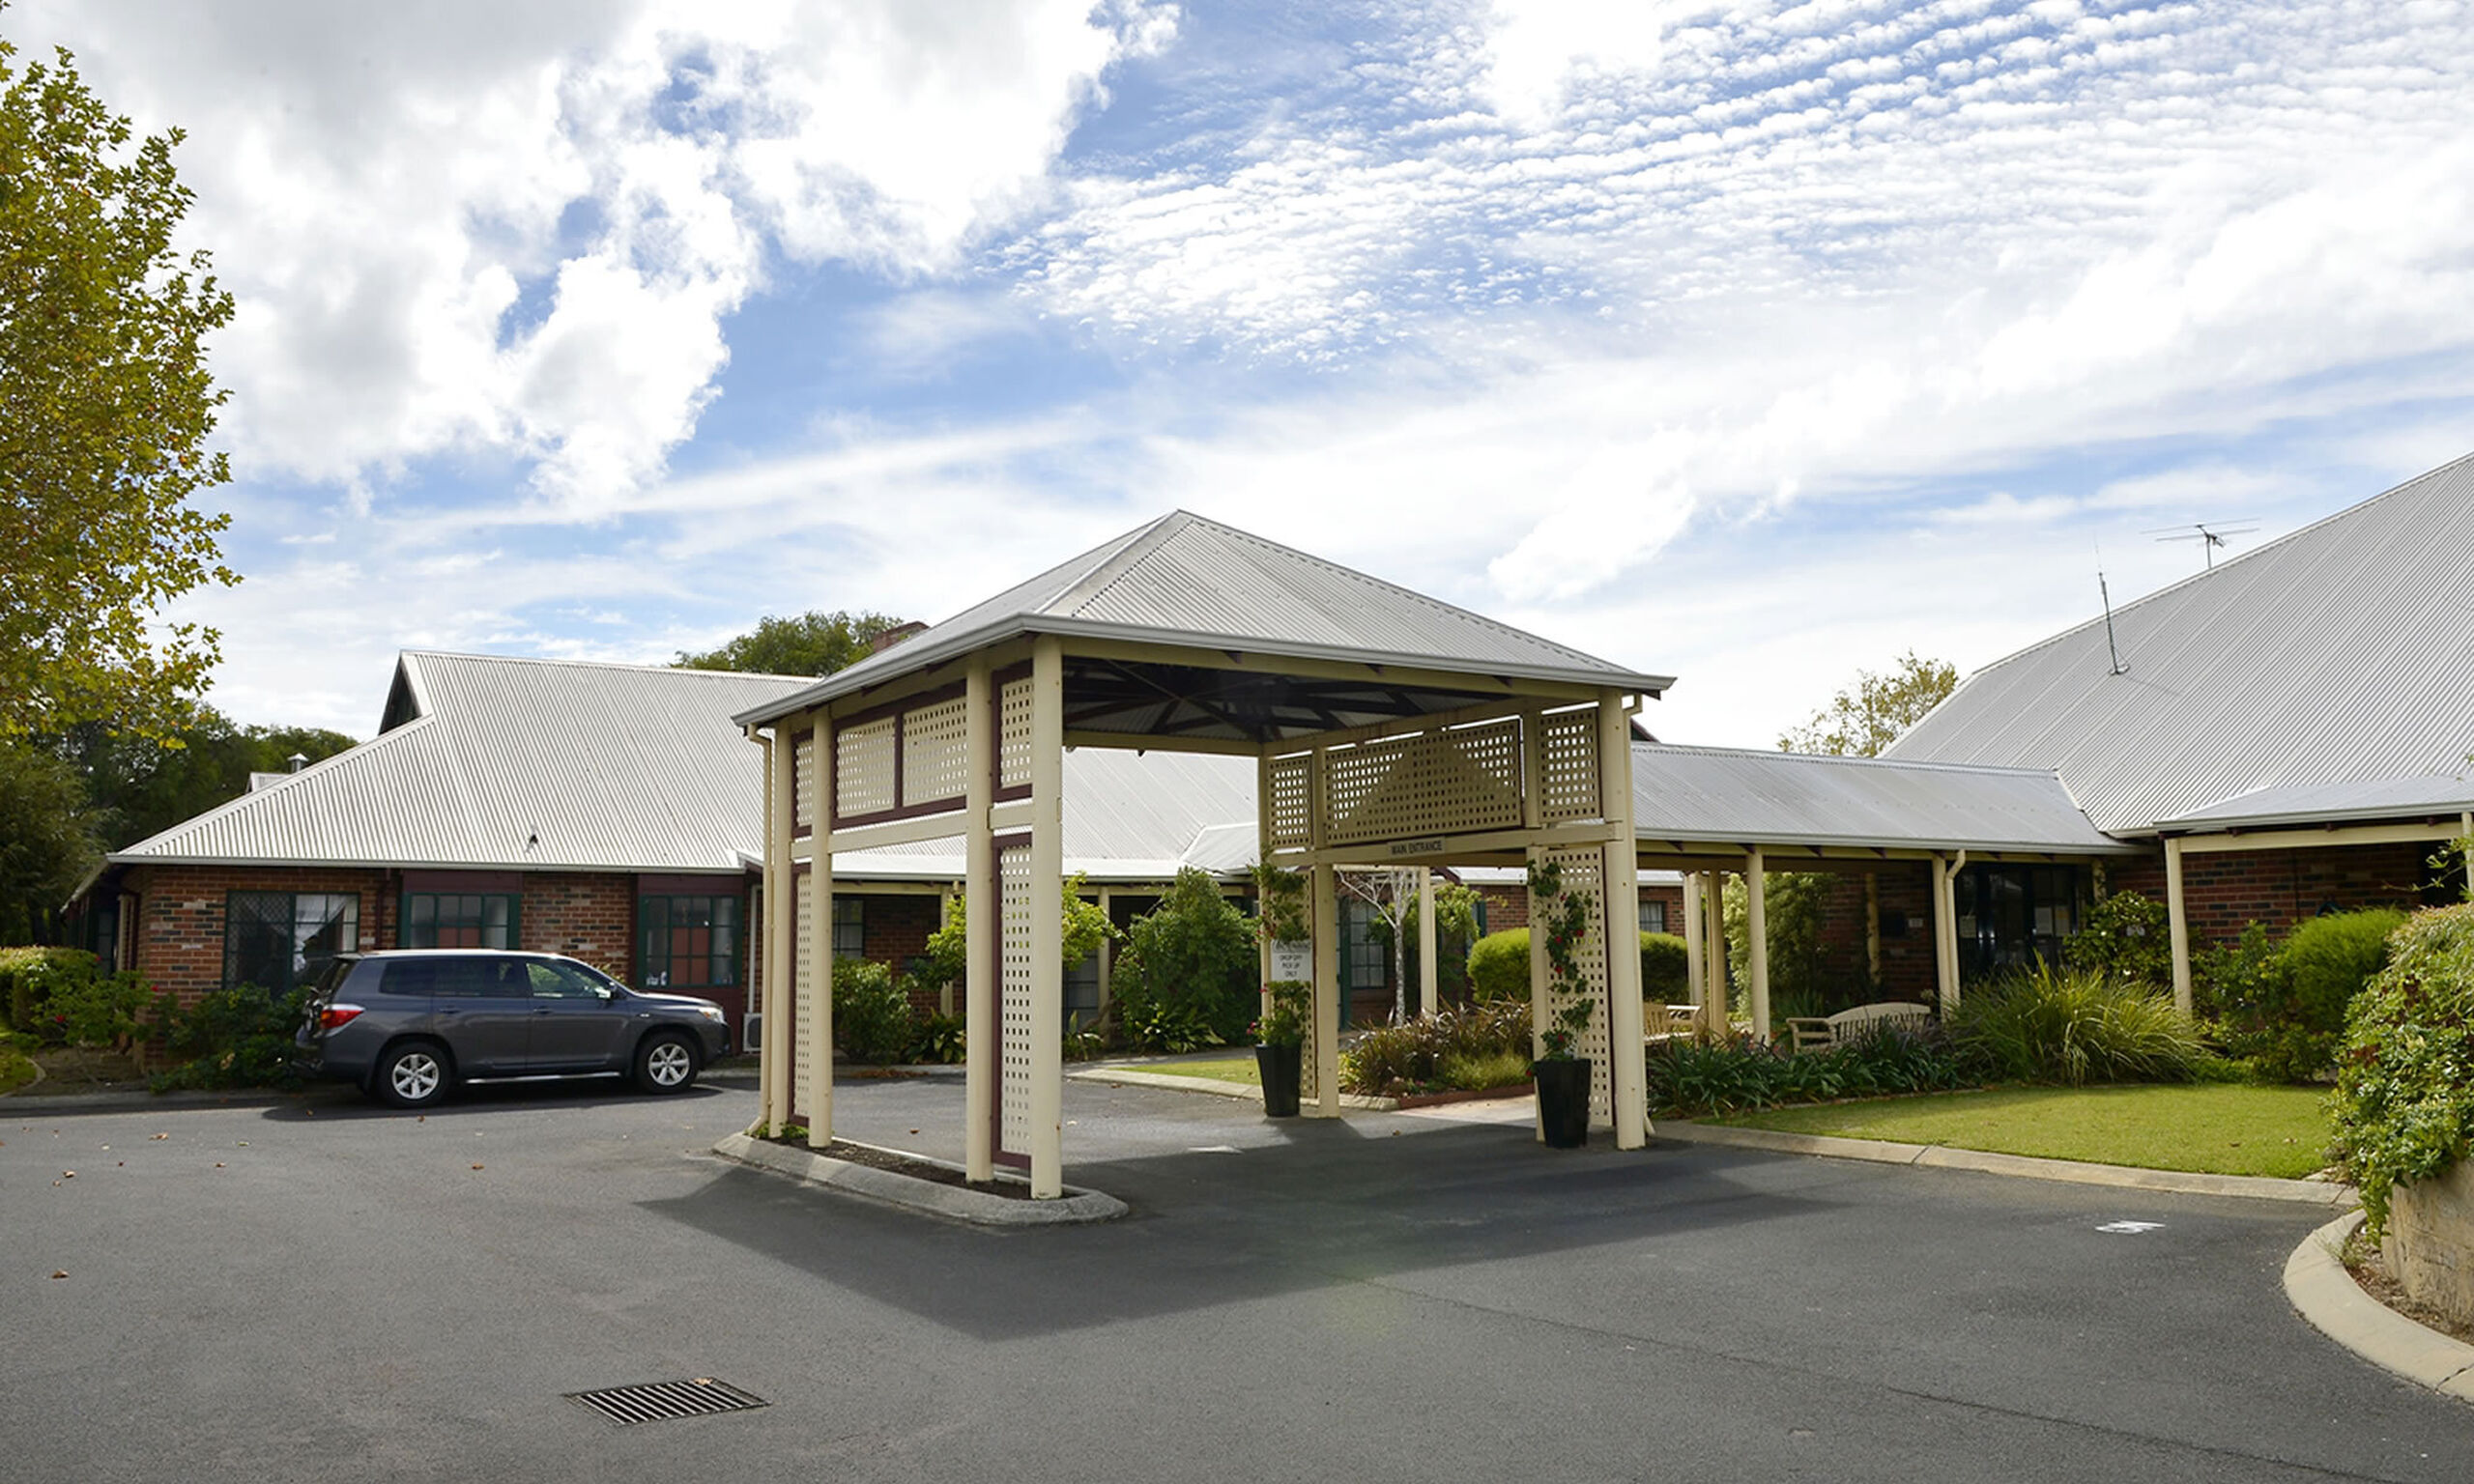 main entry for nursing home residents at baptistcare william carey court aged care home in busselton wa